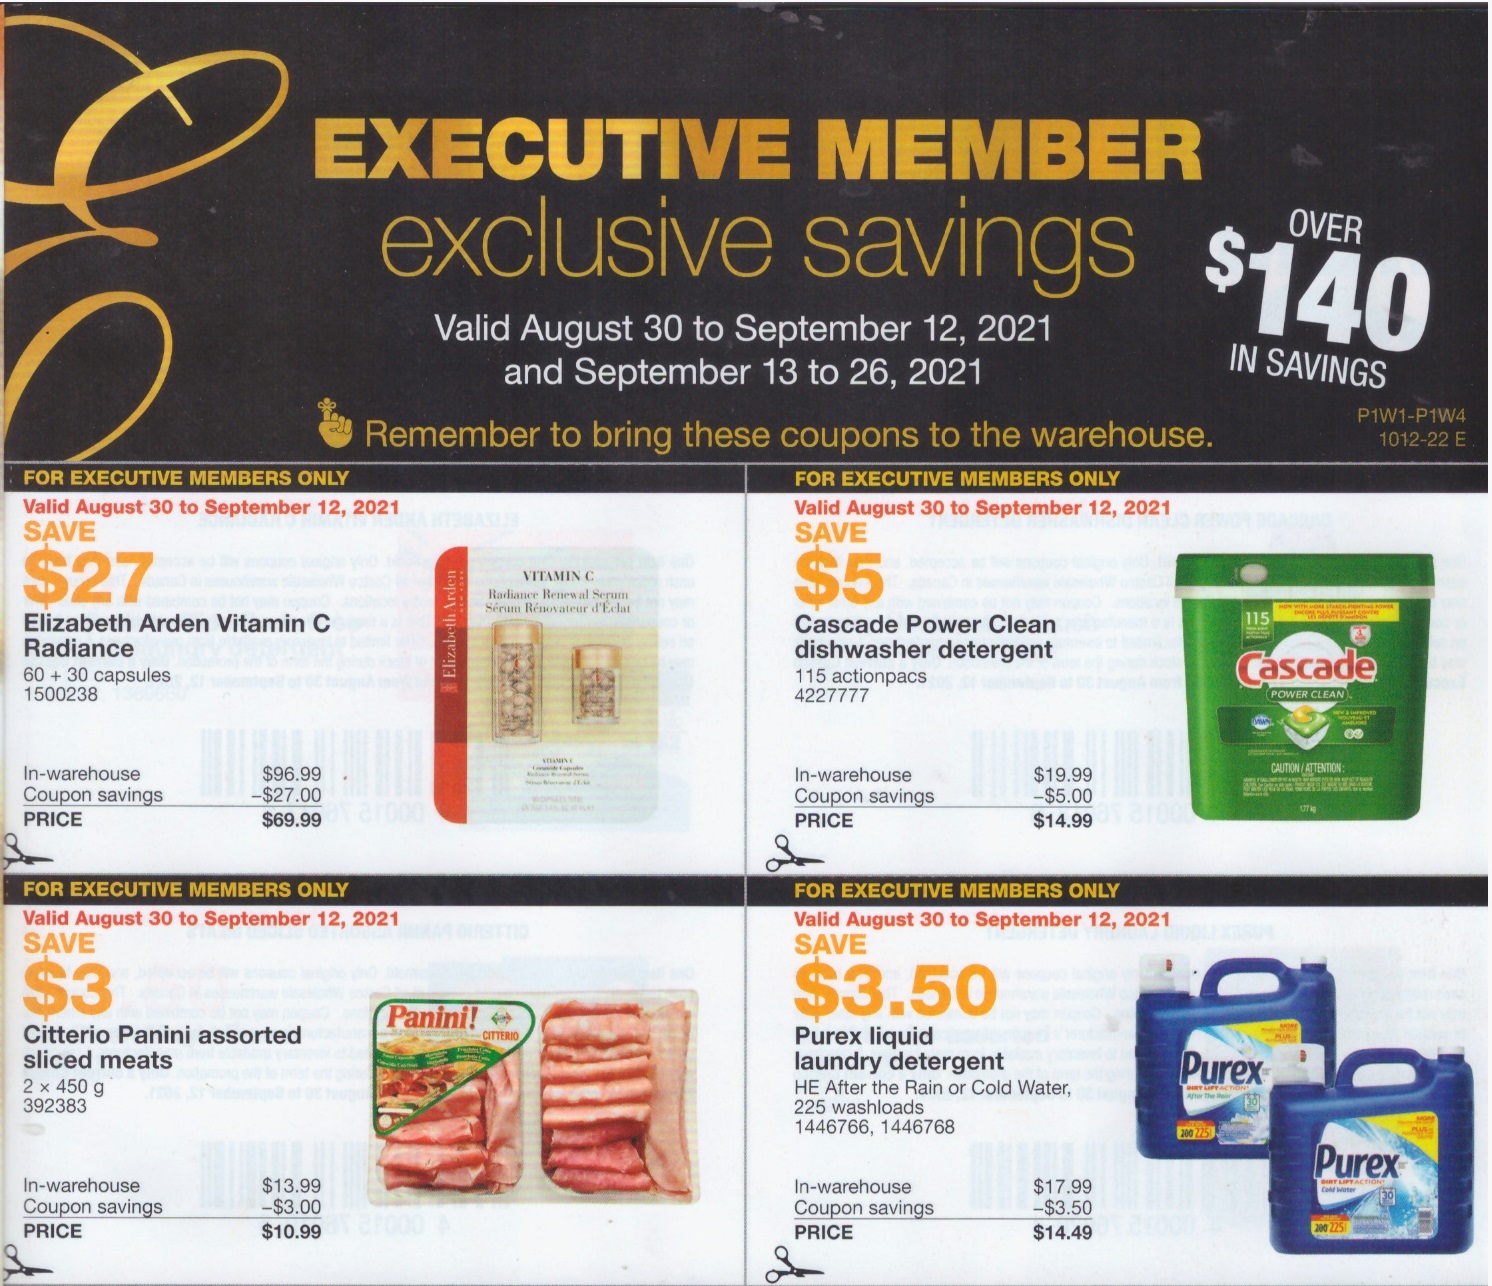 Costco Executive Coupons Aug 30 Sep 26, 2021 Costco West Fan Blog